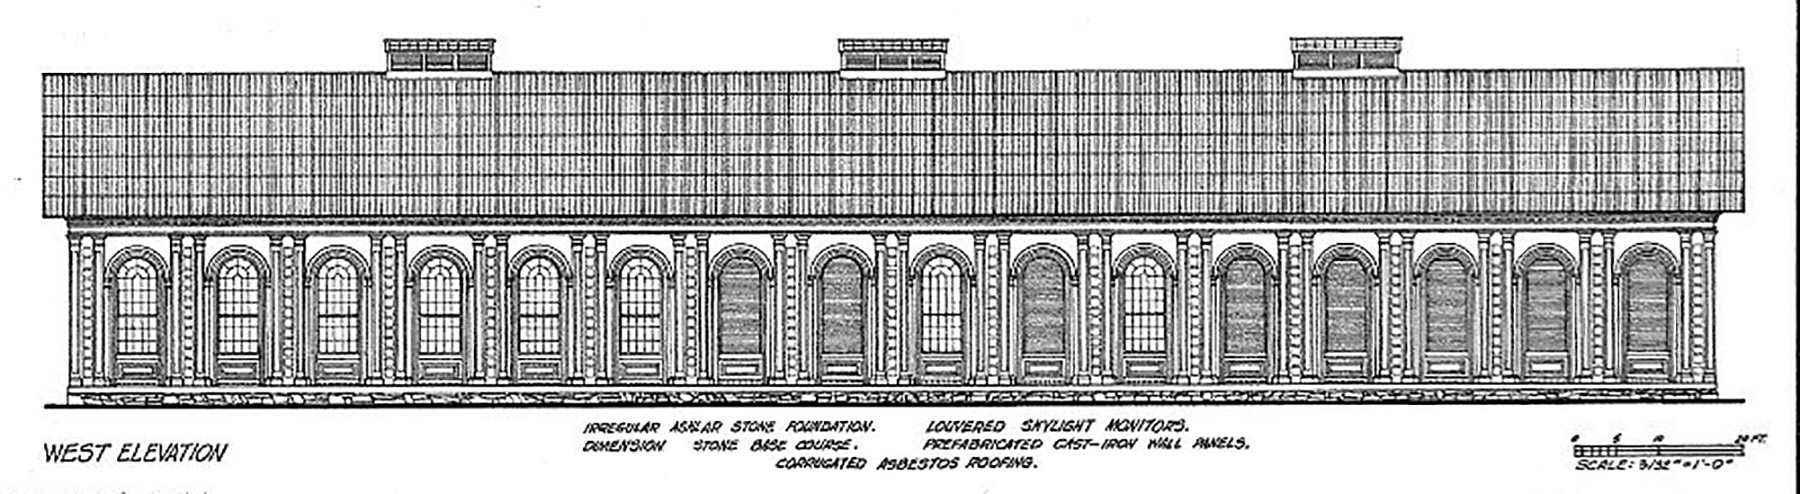 drawing of a building’s west elevation showing many windows